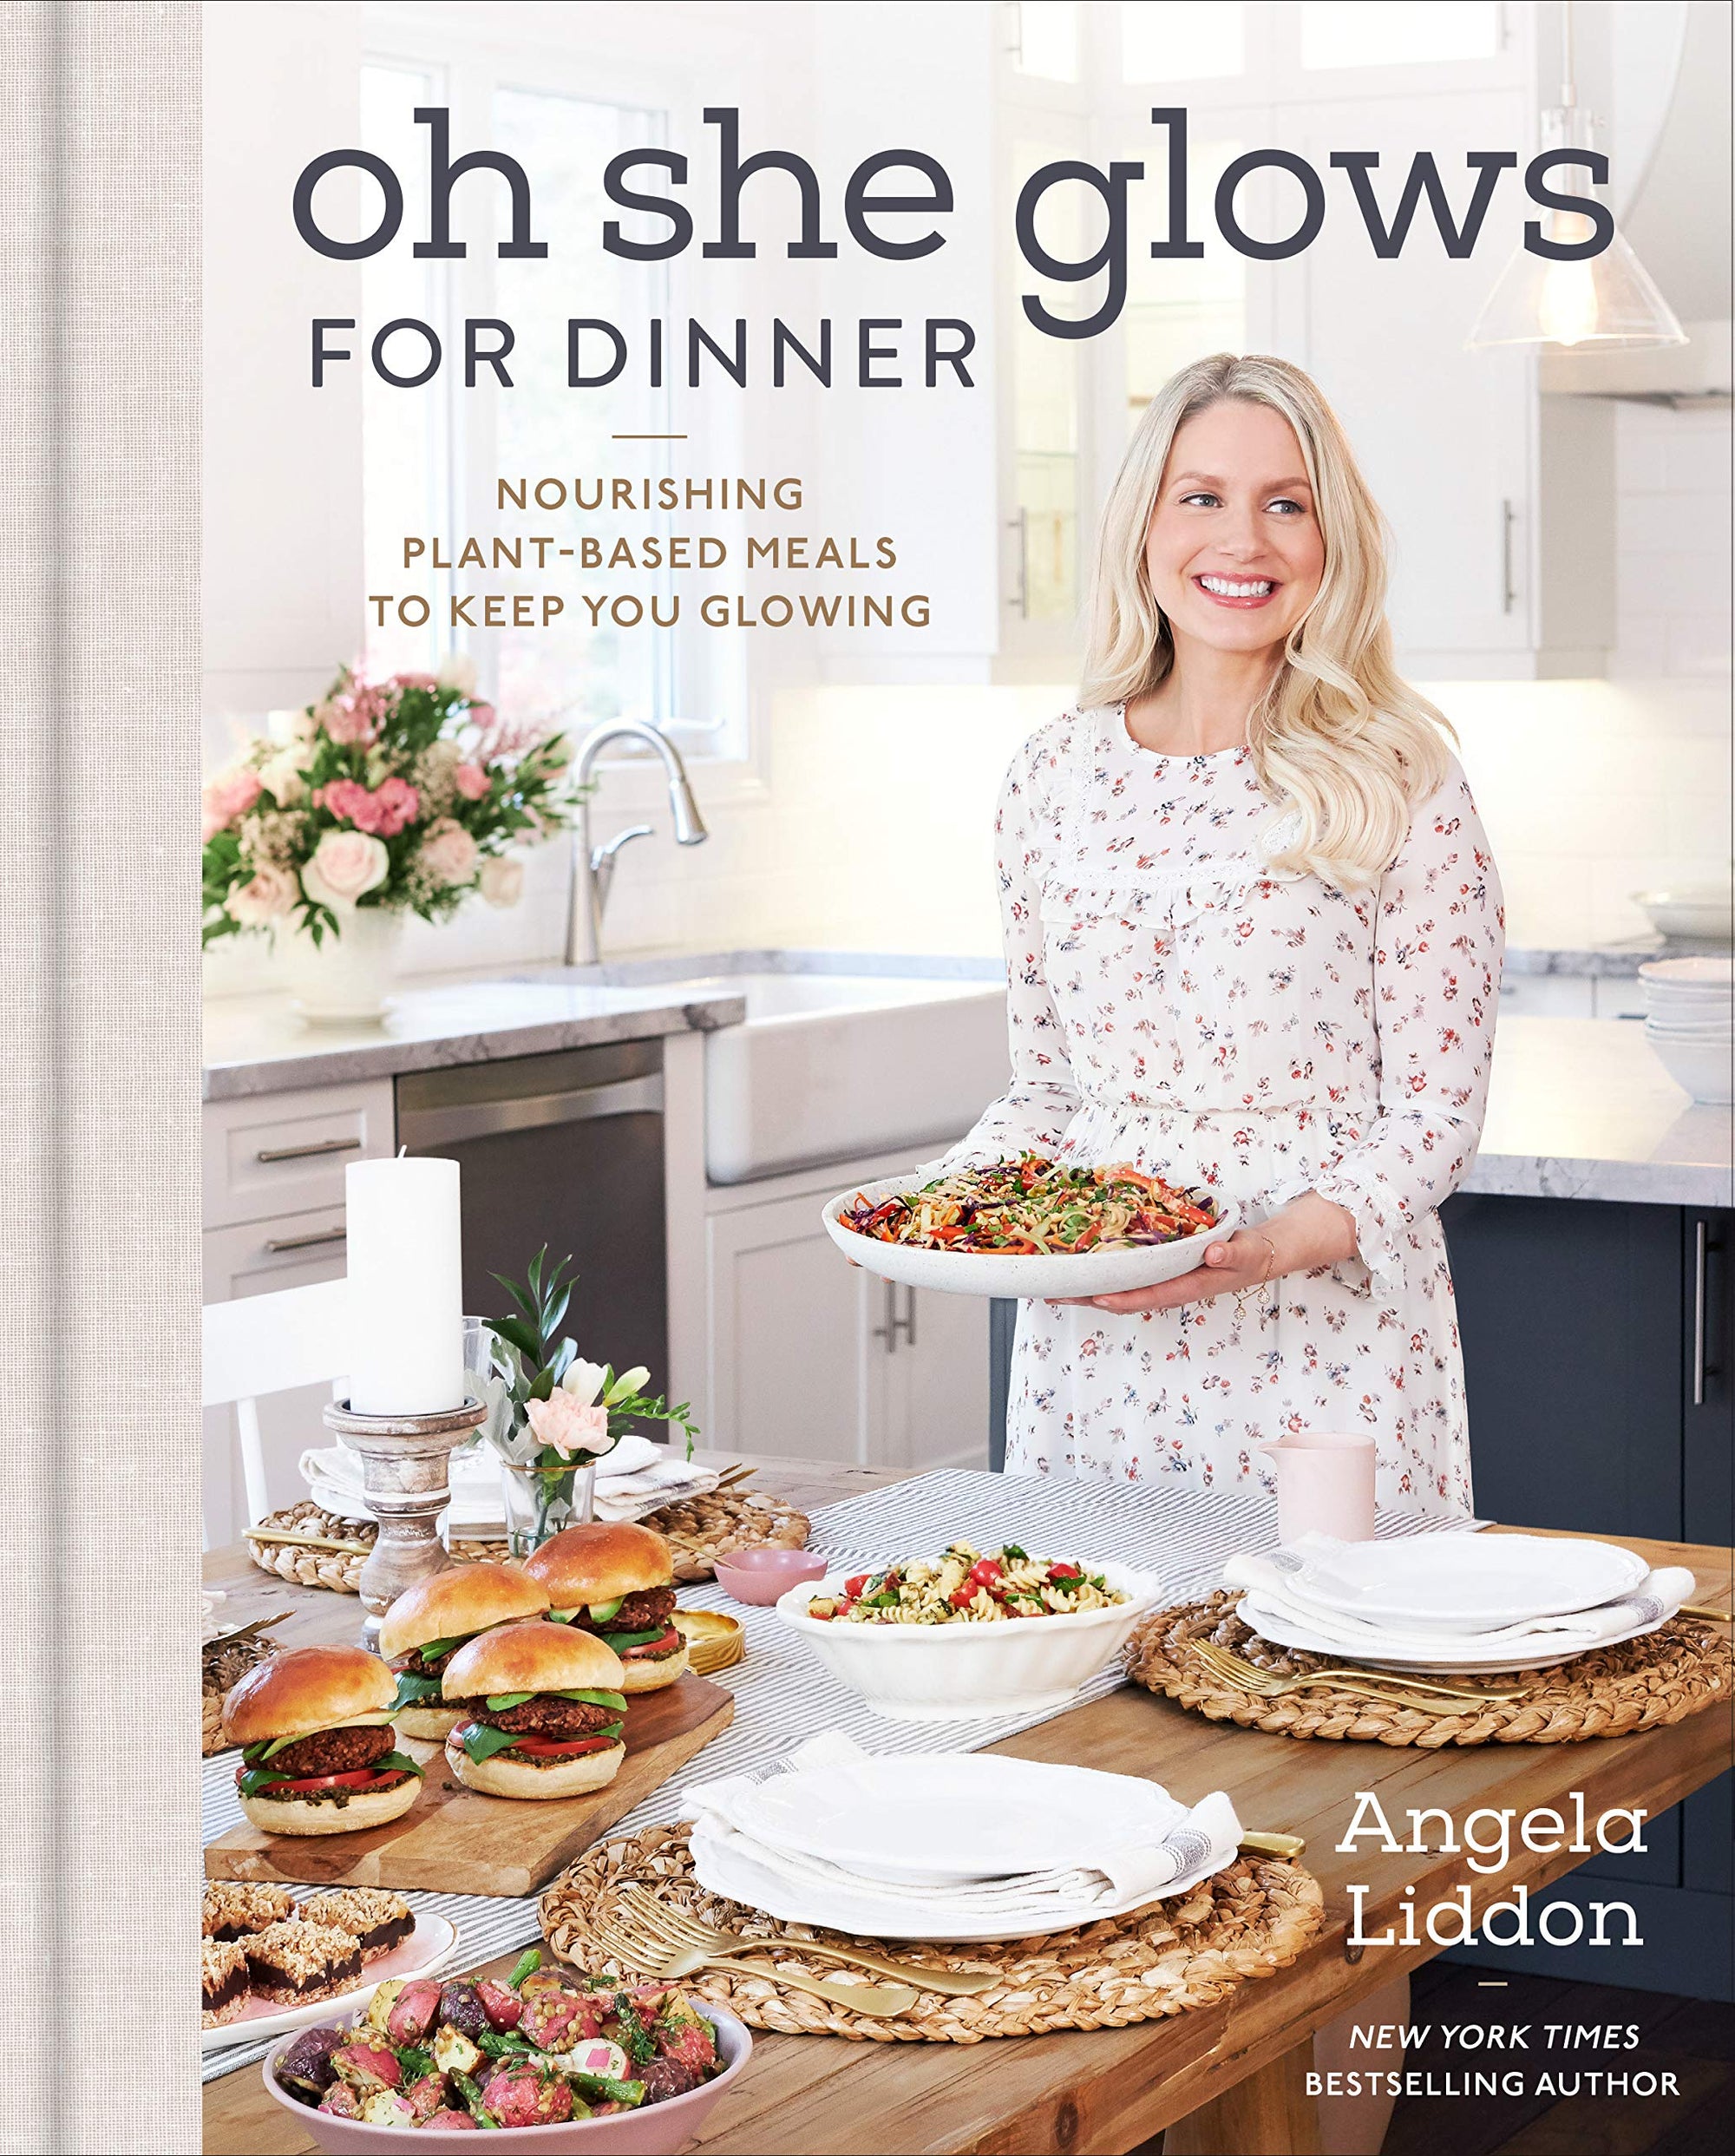 Oh She Glows for Dinner Cookbook